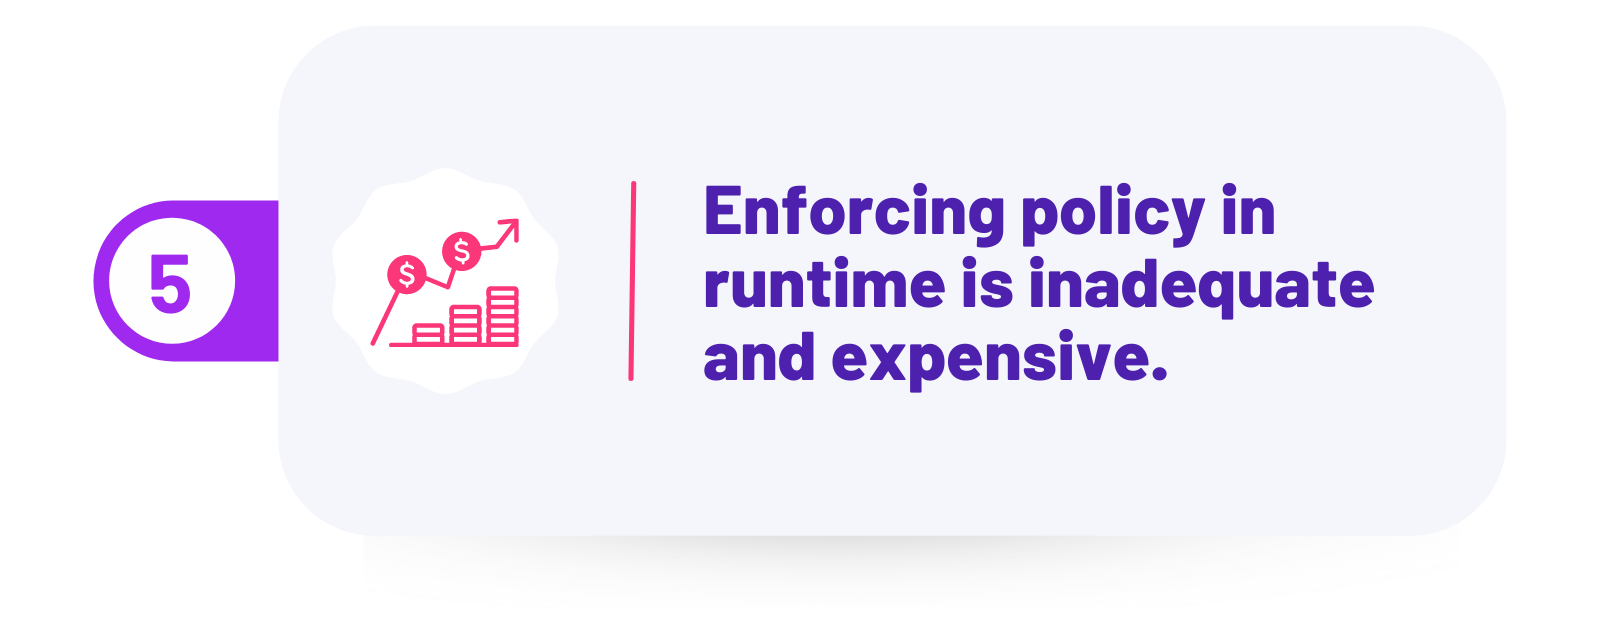 Enforcing policy in runtime is inadequate and expensive